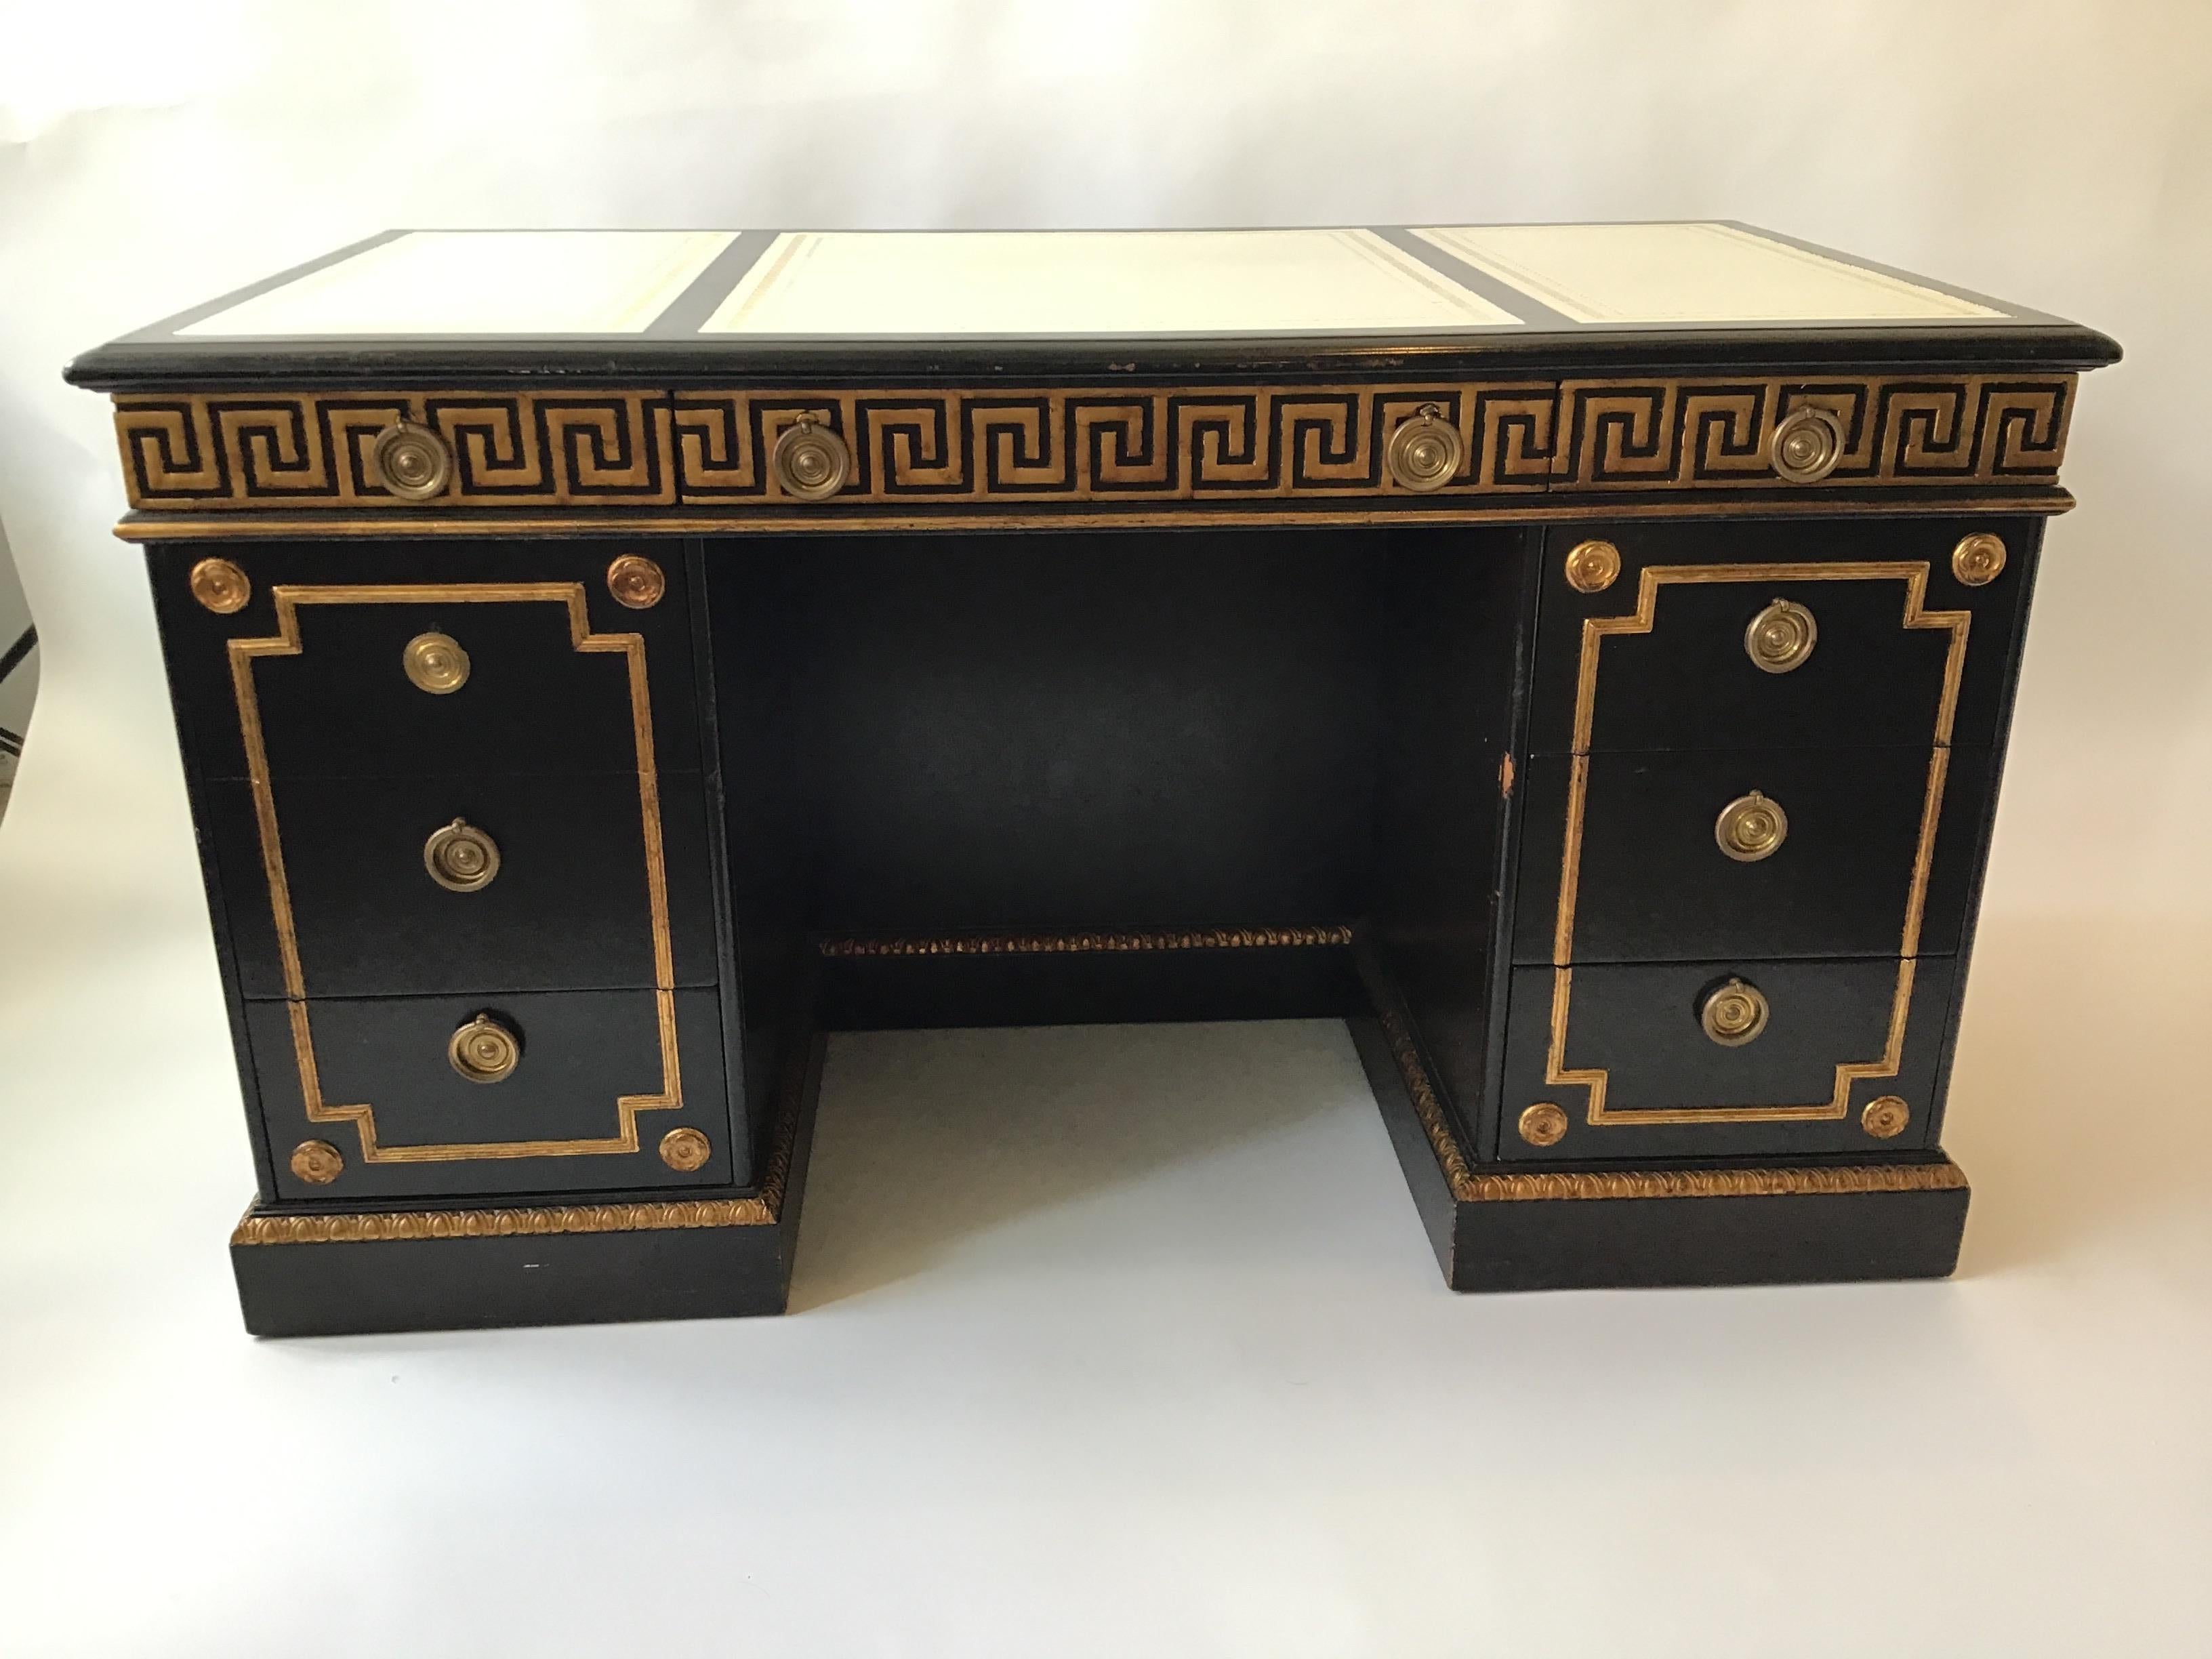 Very well made desk, probably by Baker. Gilt Greek key desk. The finish is black stain. Finished back with shelf. Leather top with embossed Greek key. The drawers are Very deep, they’re the length of the desk. Bronze hardware.